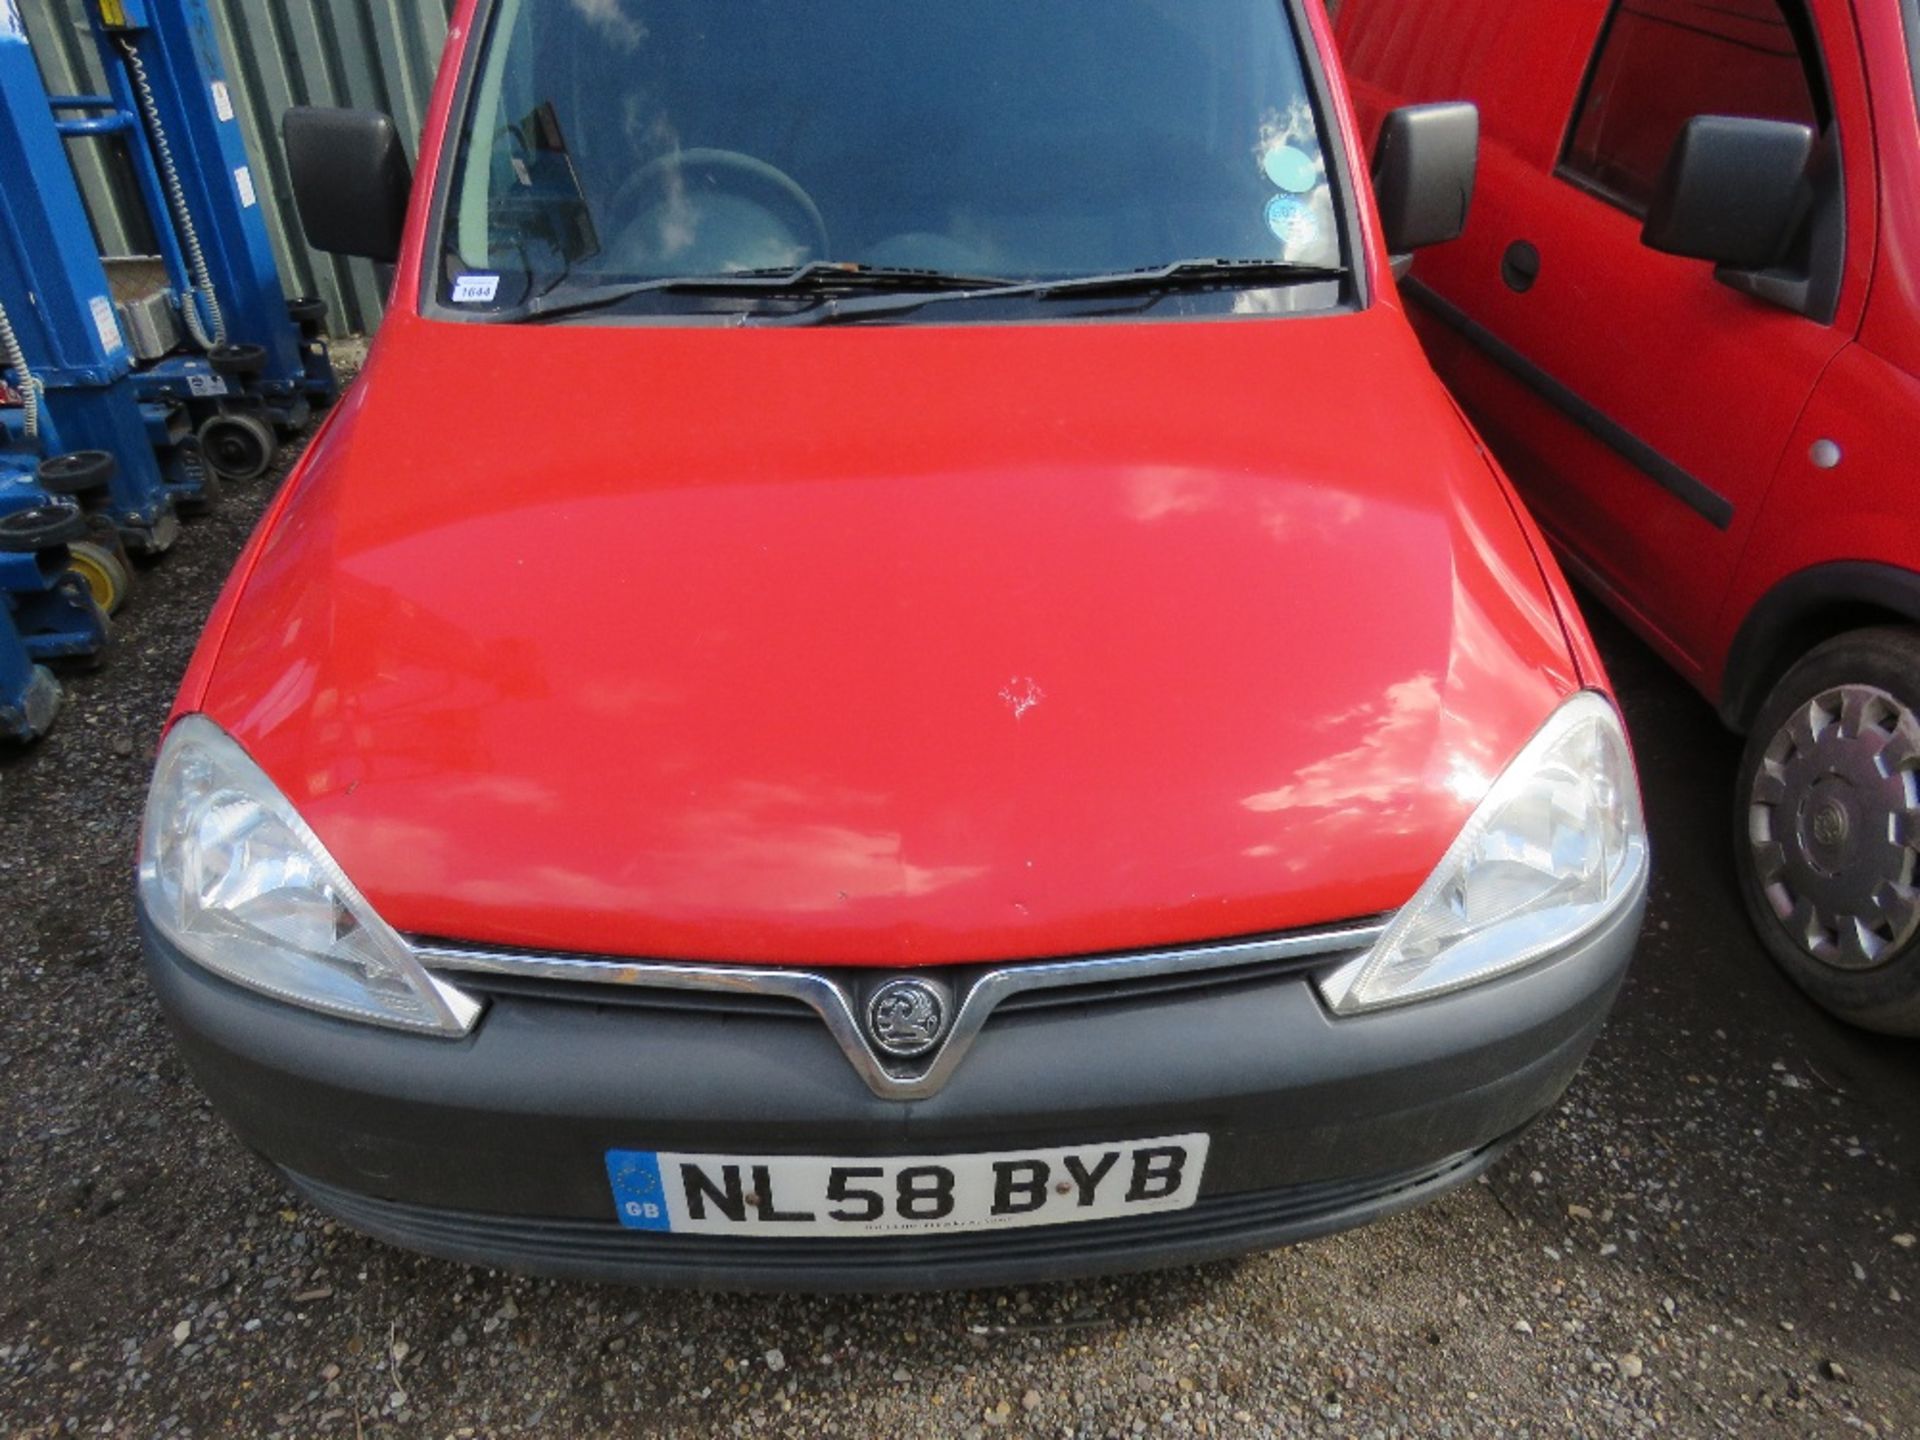 VAUXHALL COMBO PANEL VAN REG:NL58 BYB. MILES NOT SHOWING. TEST EXPIRED. SIDE DOOR. WHEN TESTED WAS S - Image 2 of 9